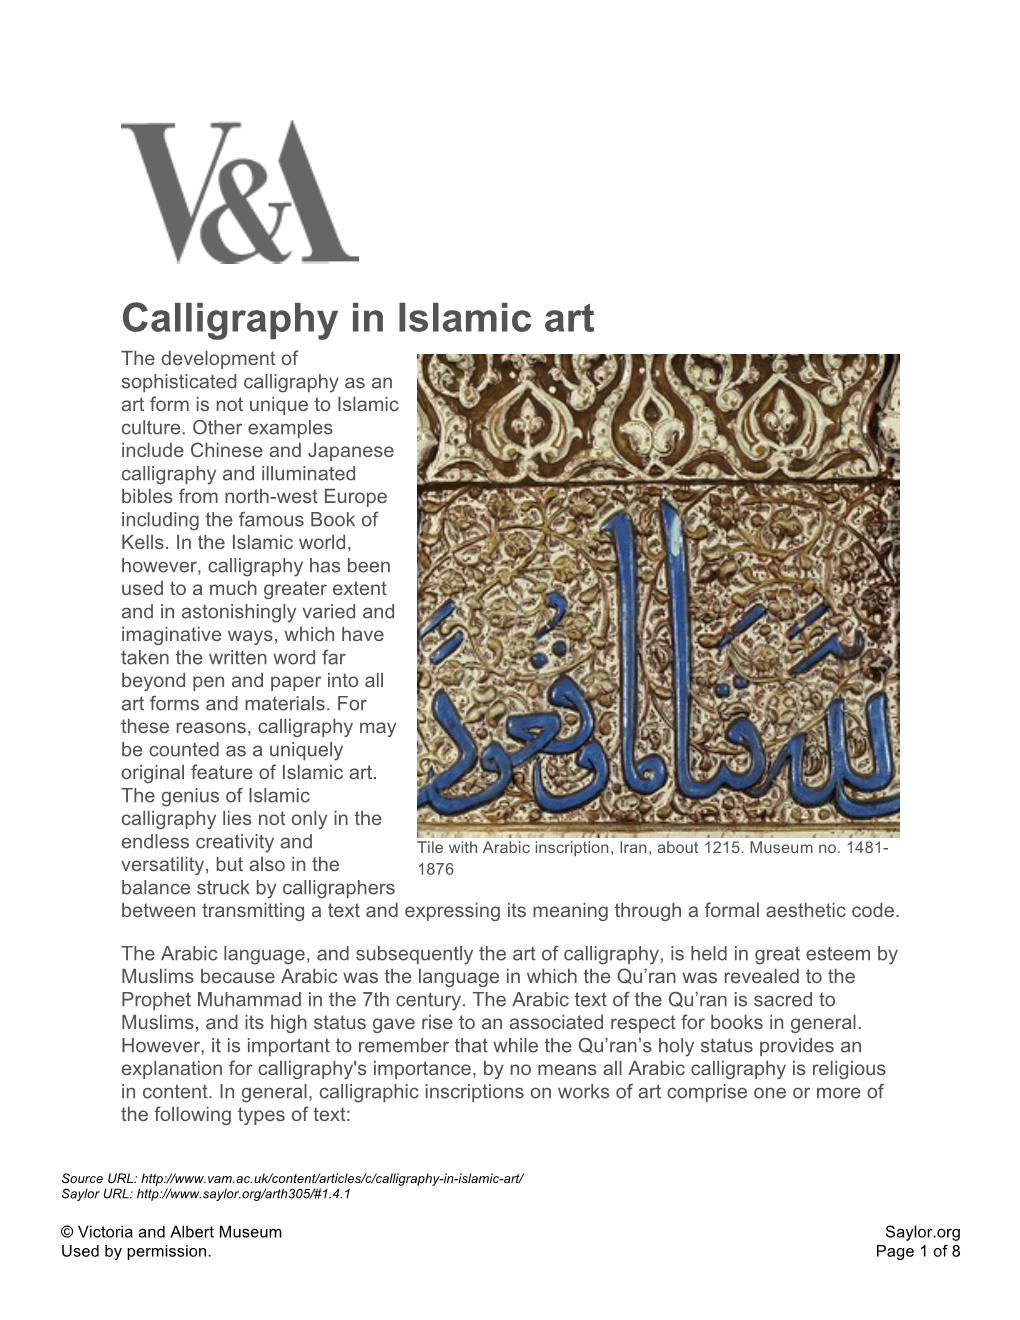 Calligraphy in Islamic Art the Development of Sophisticated Calligraphy As an Art Form Is Not Unique to Islamic Culture